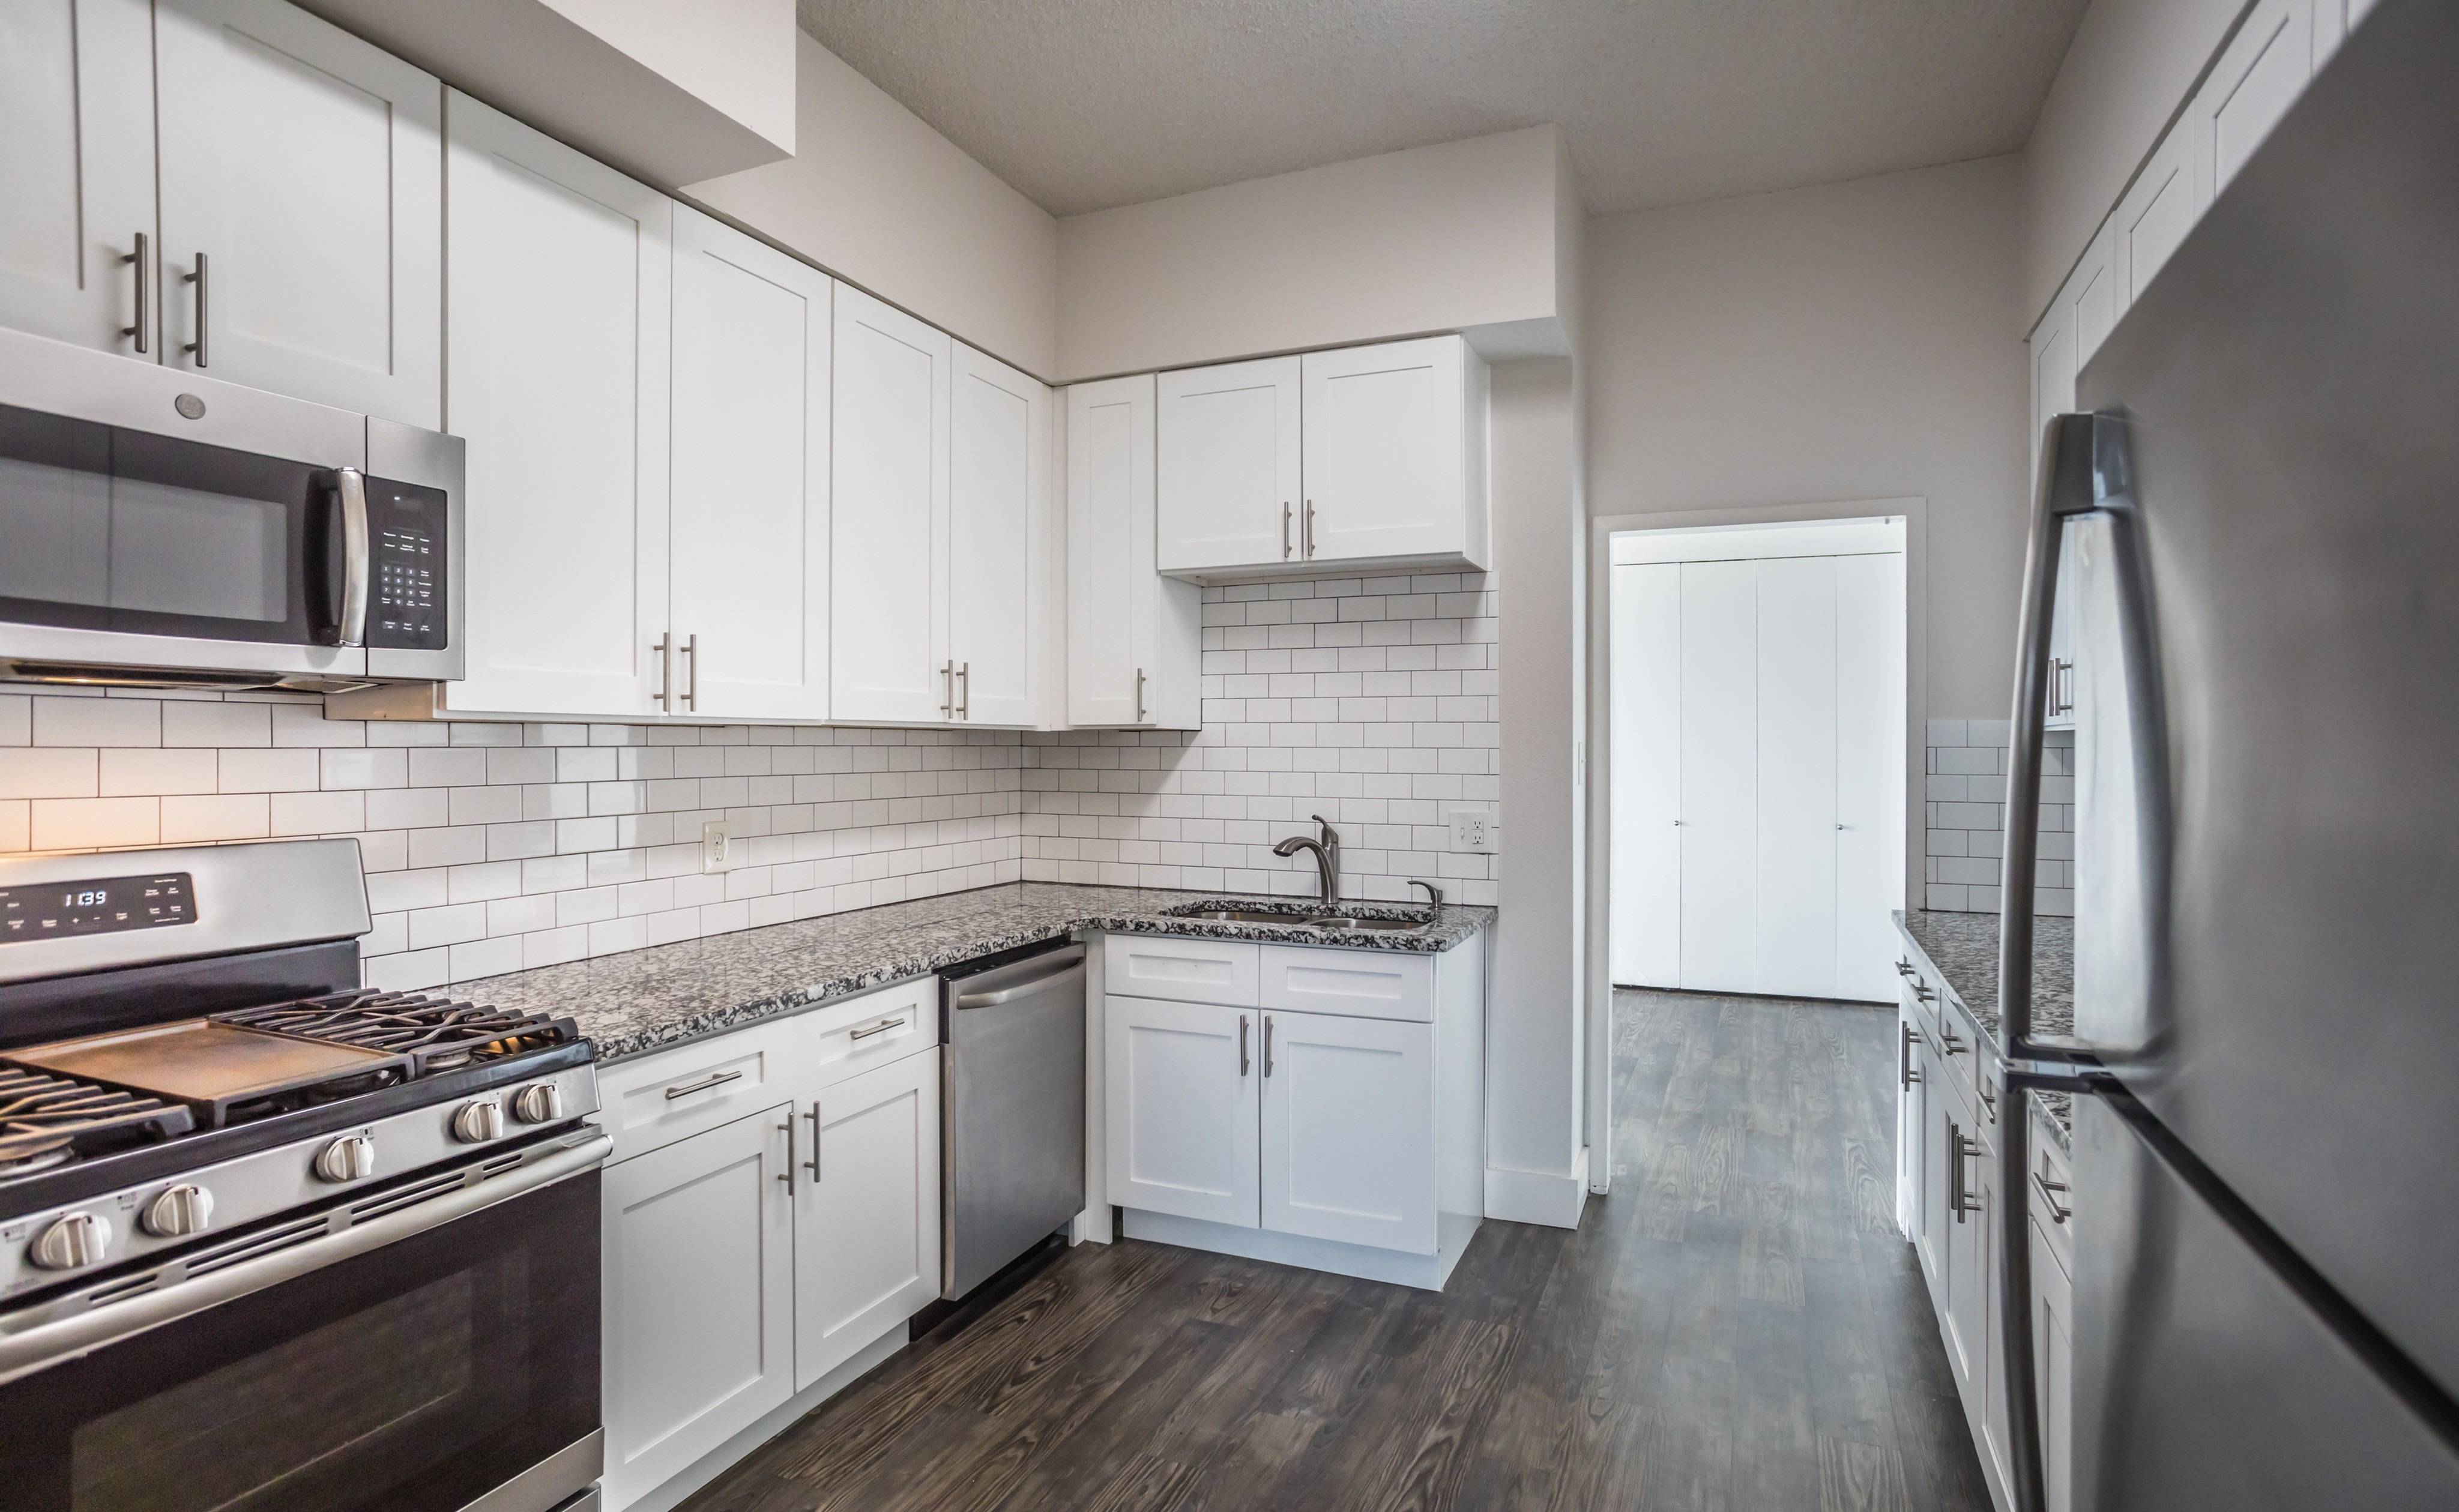 Granite Countertops and stainless steel appliances in newly renovated apartment